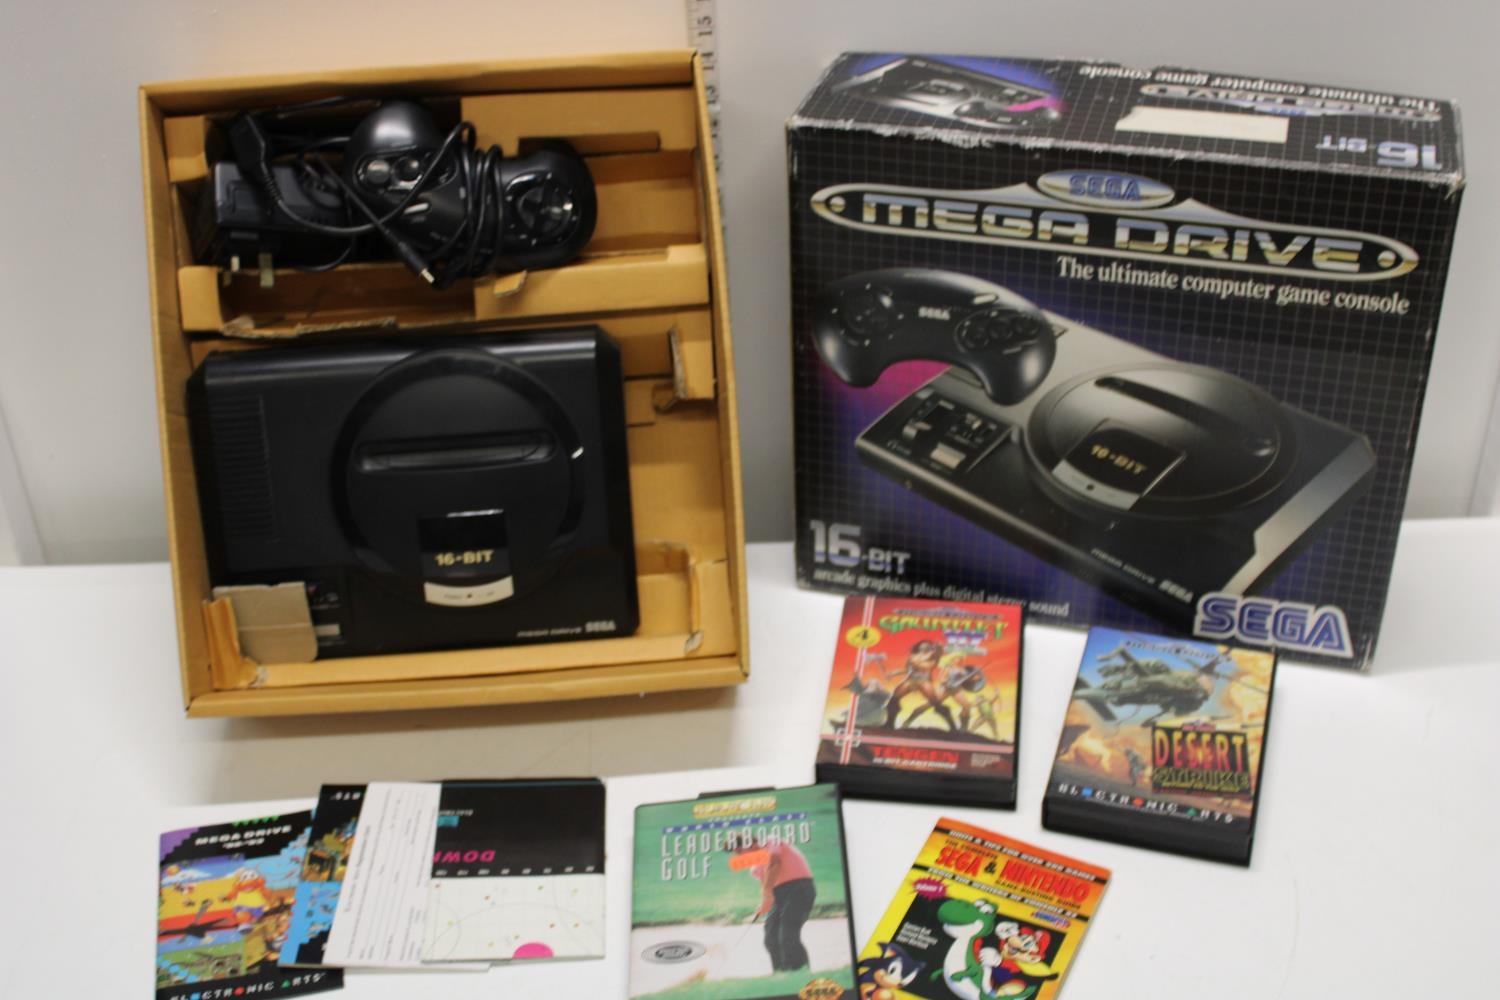 A boxed Sega Mega drive with an assortment of games and accessories